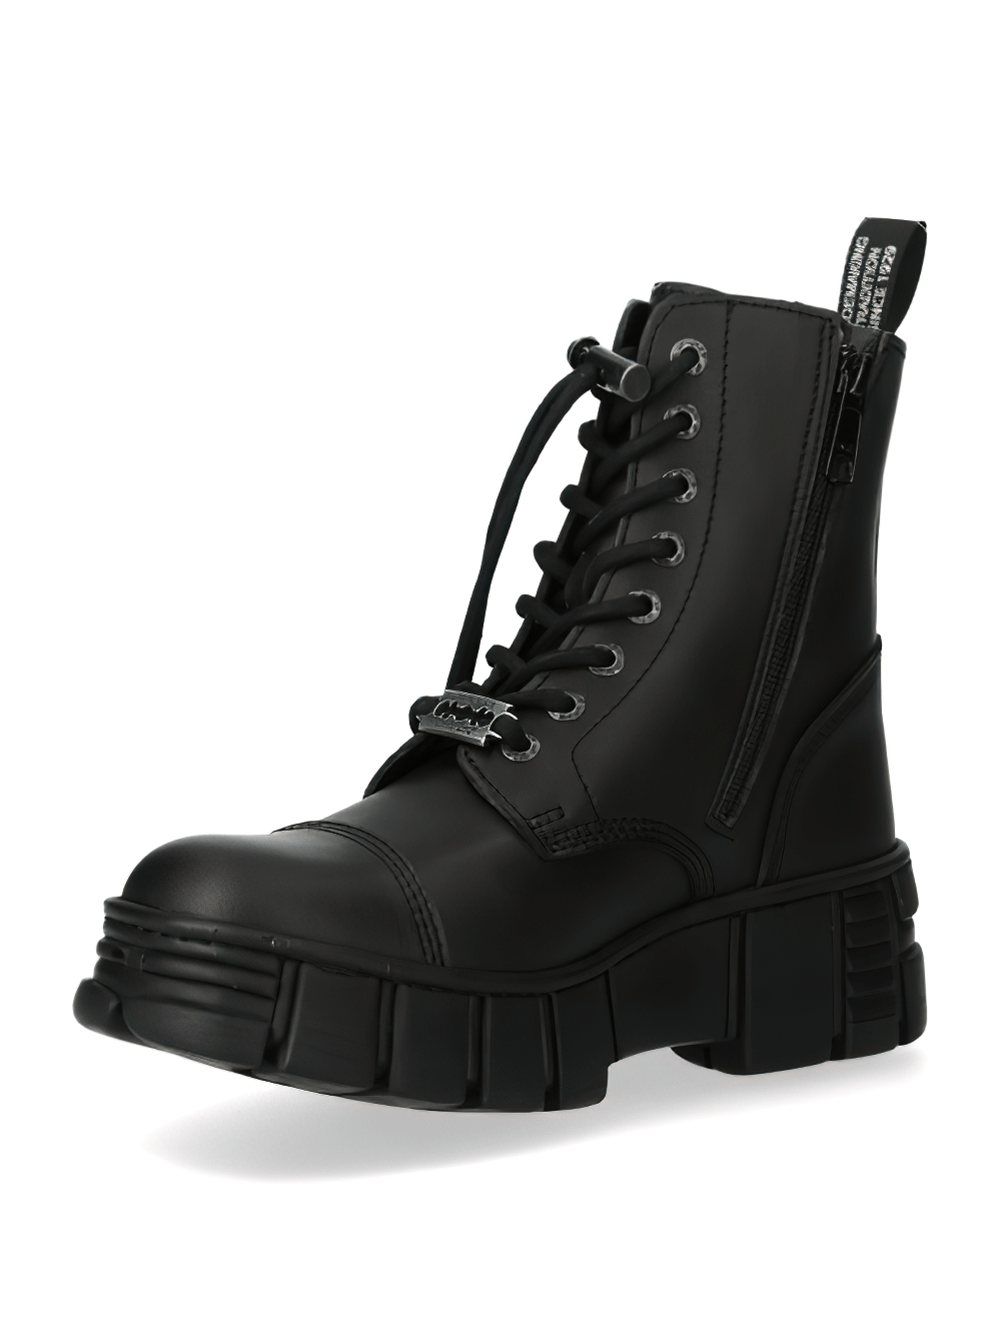 NEW ROCK Black Synthetic Military Ankle Boots with Laces